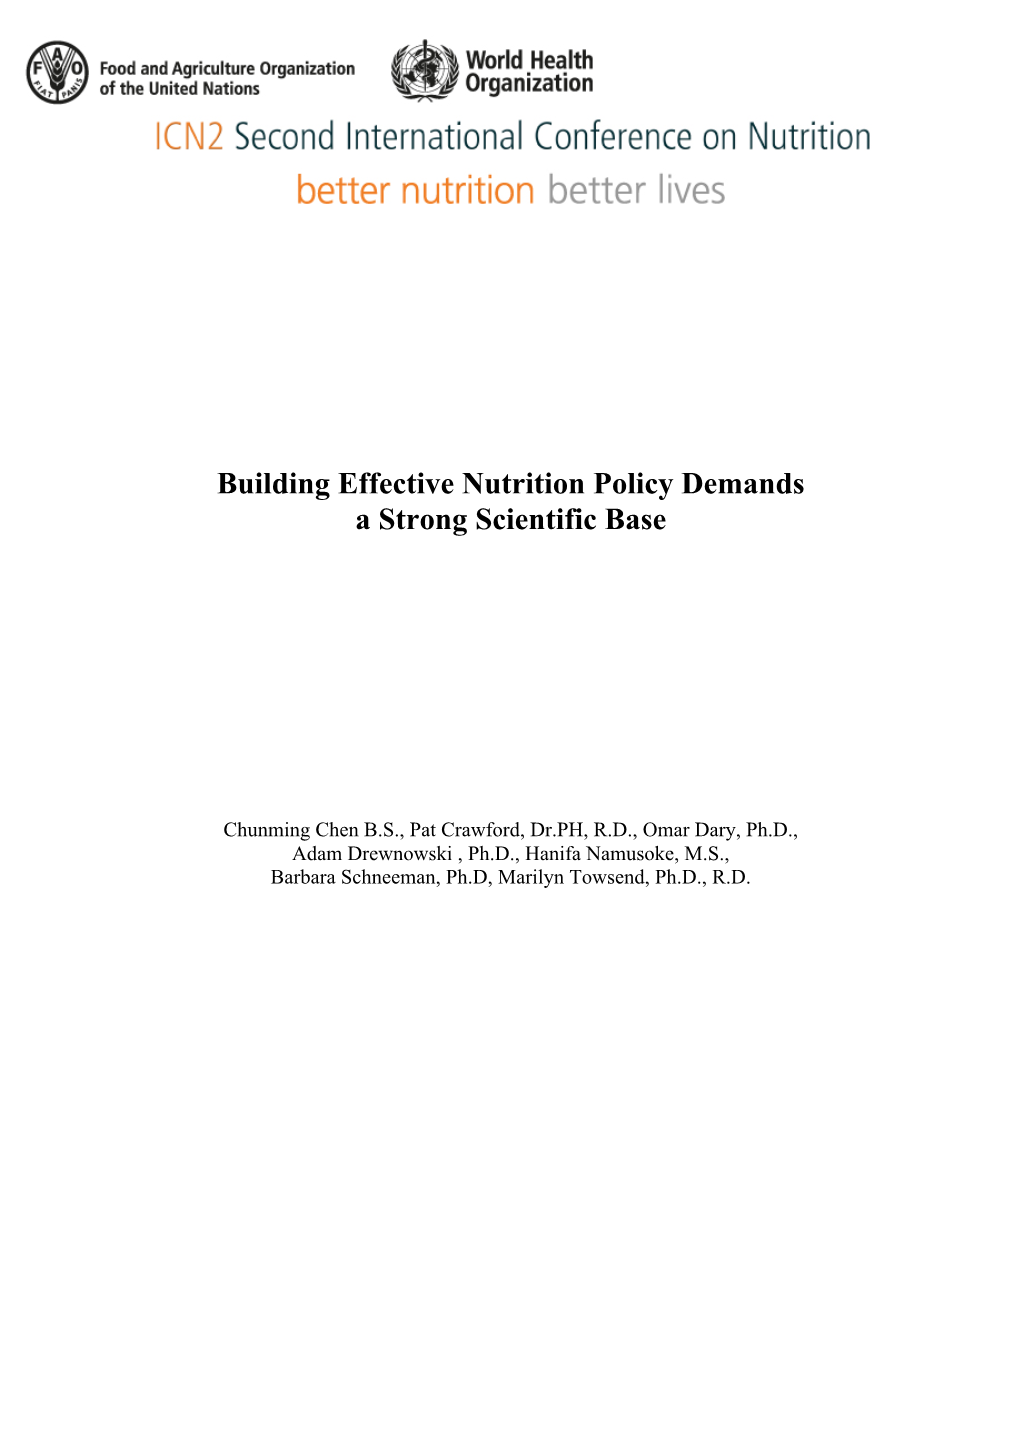 Building Effective Nutrition Policy Demands a Strong Scientific Base